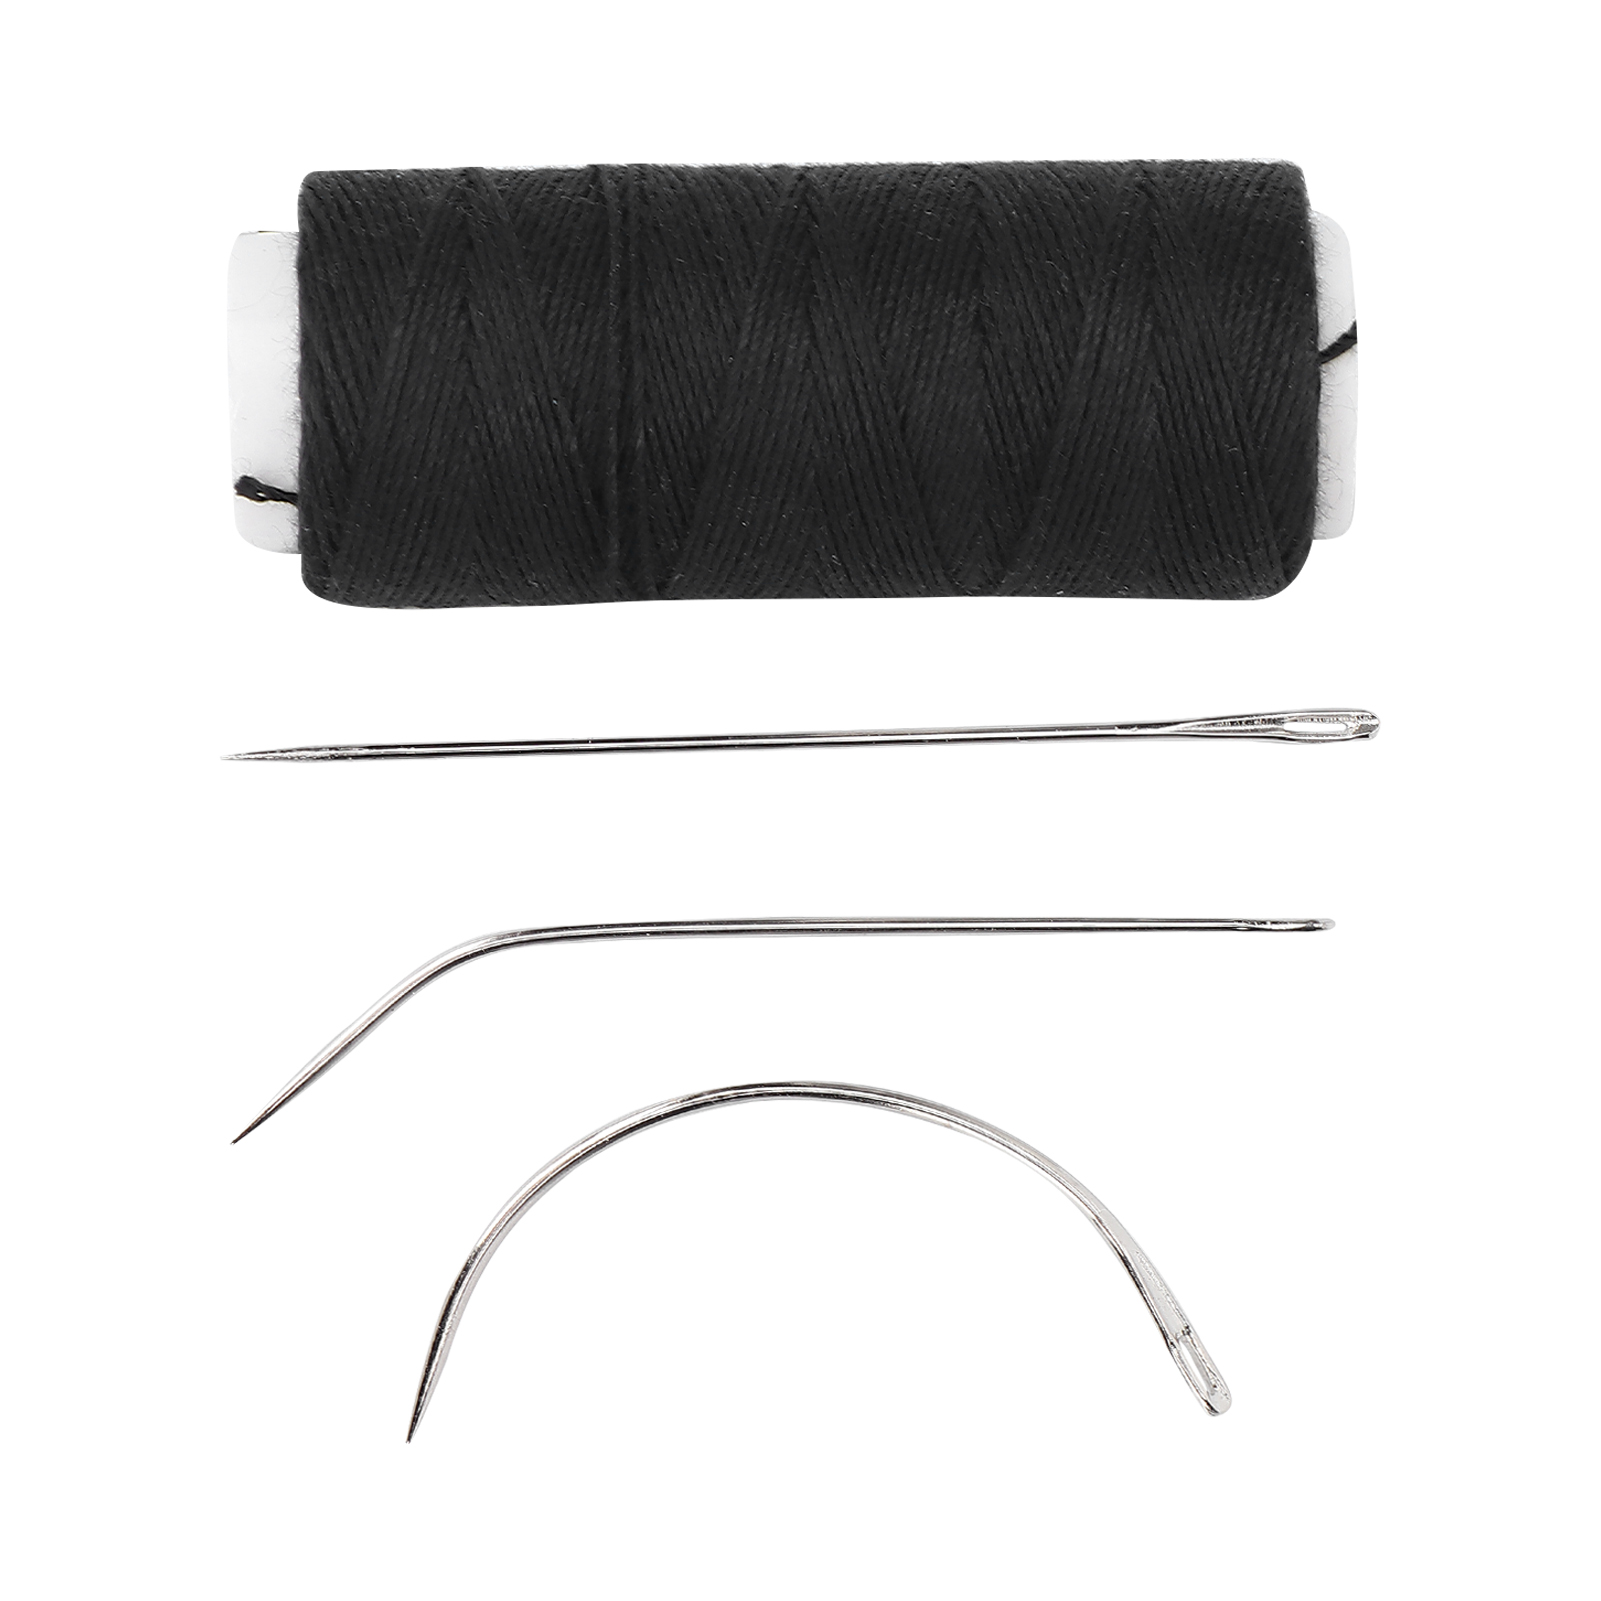 Hair Needle, Durable Hair Thread And Needle Comfortable Grasp For Making  For Weaving For Crafts 